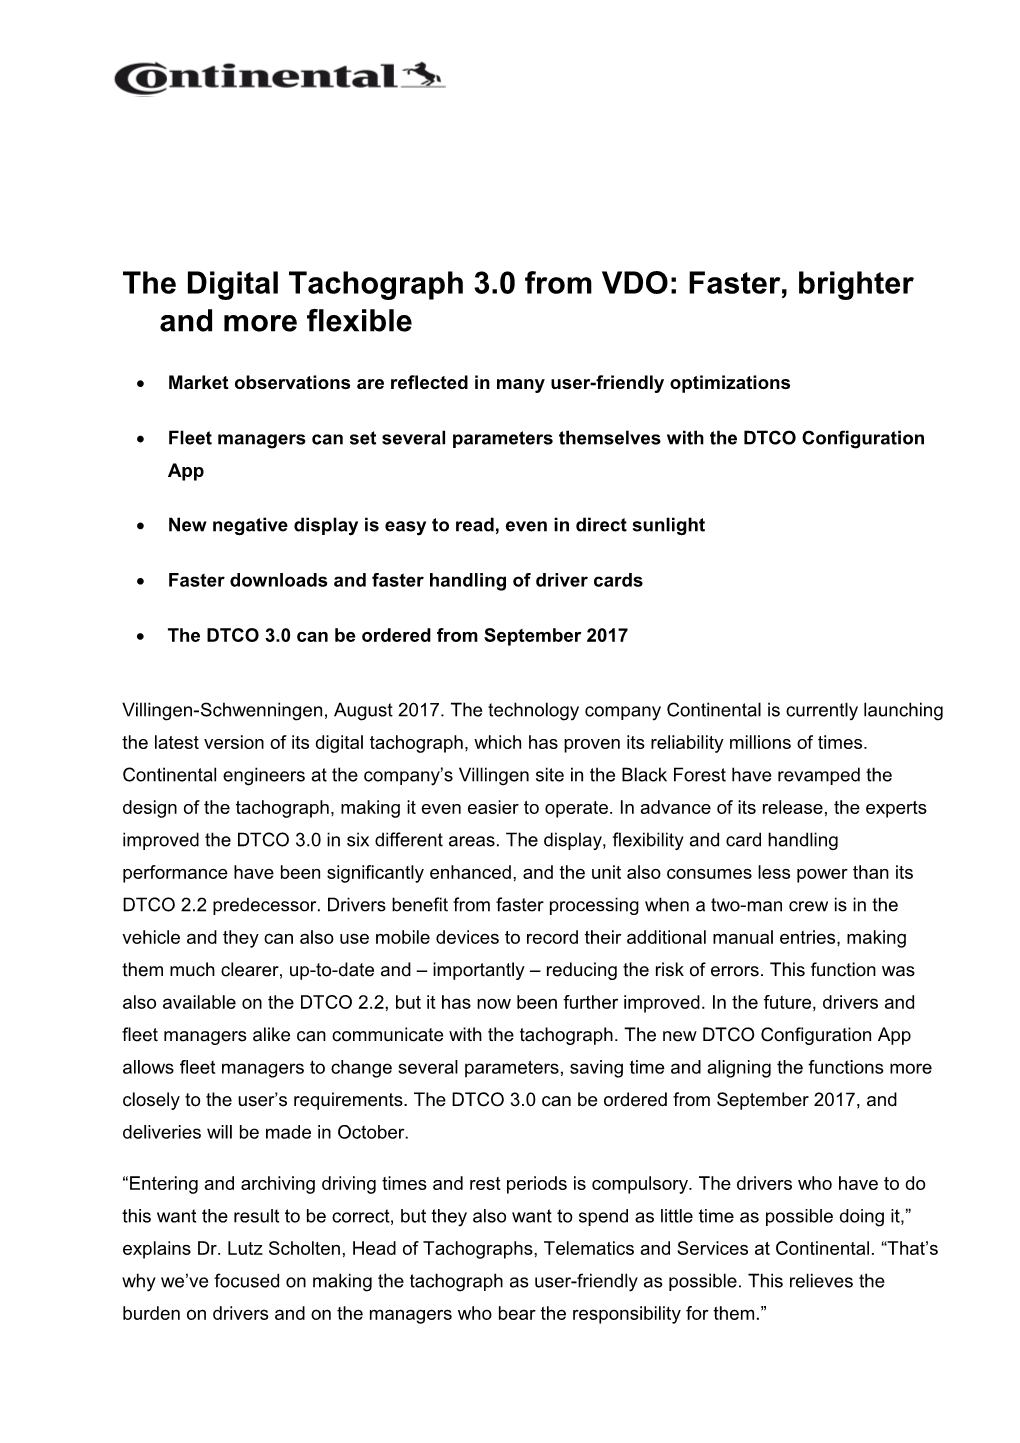 The Digital Tachograph 3.0 from VDO: Faster, Brighter and More Flexible